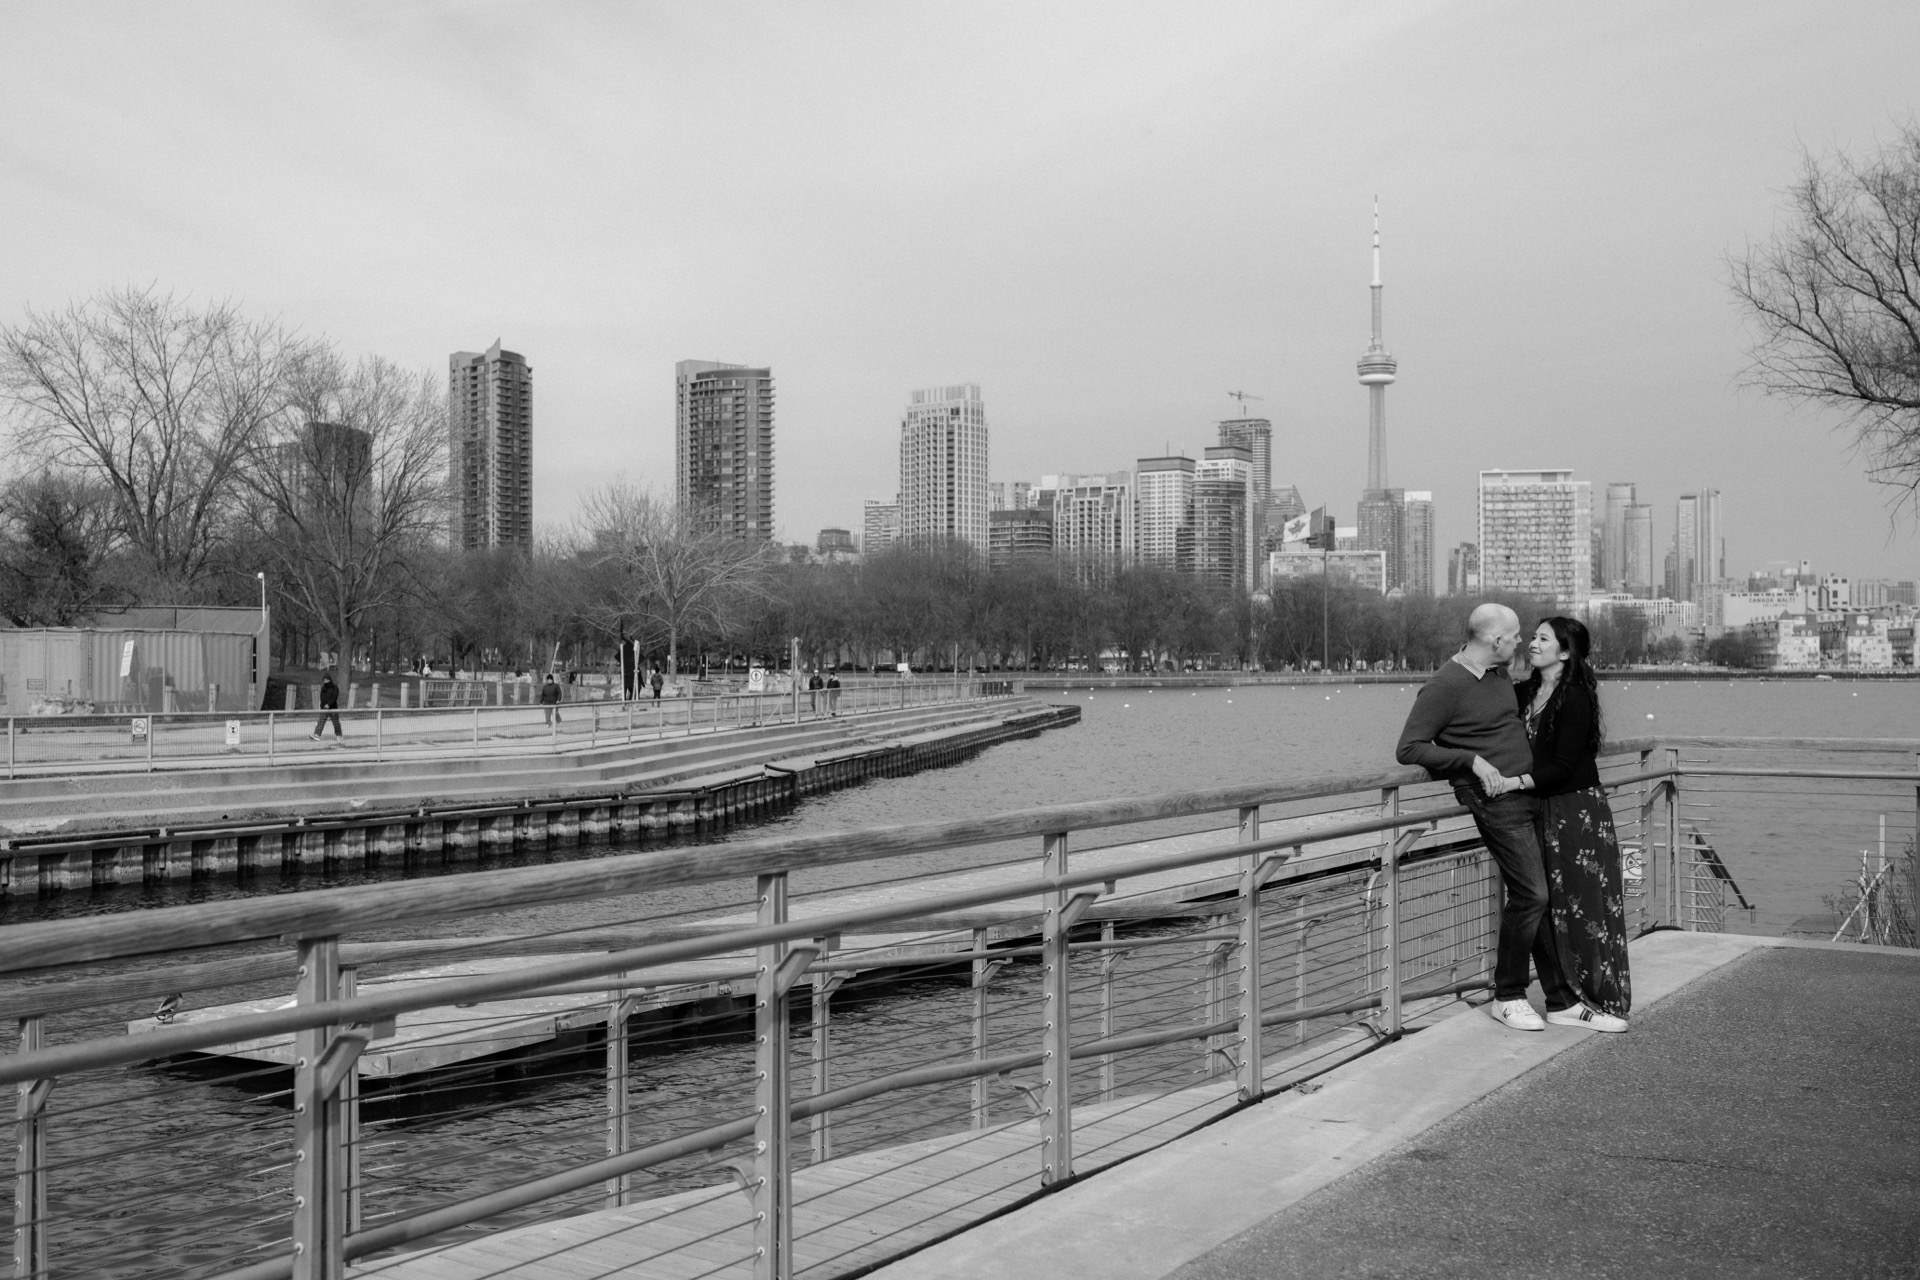 A couple embraces near a waterfront with a city skyline in the background.